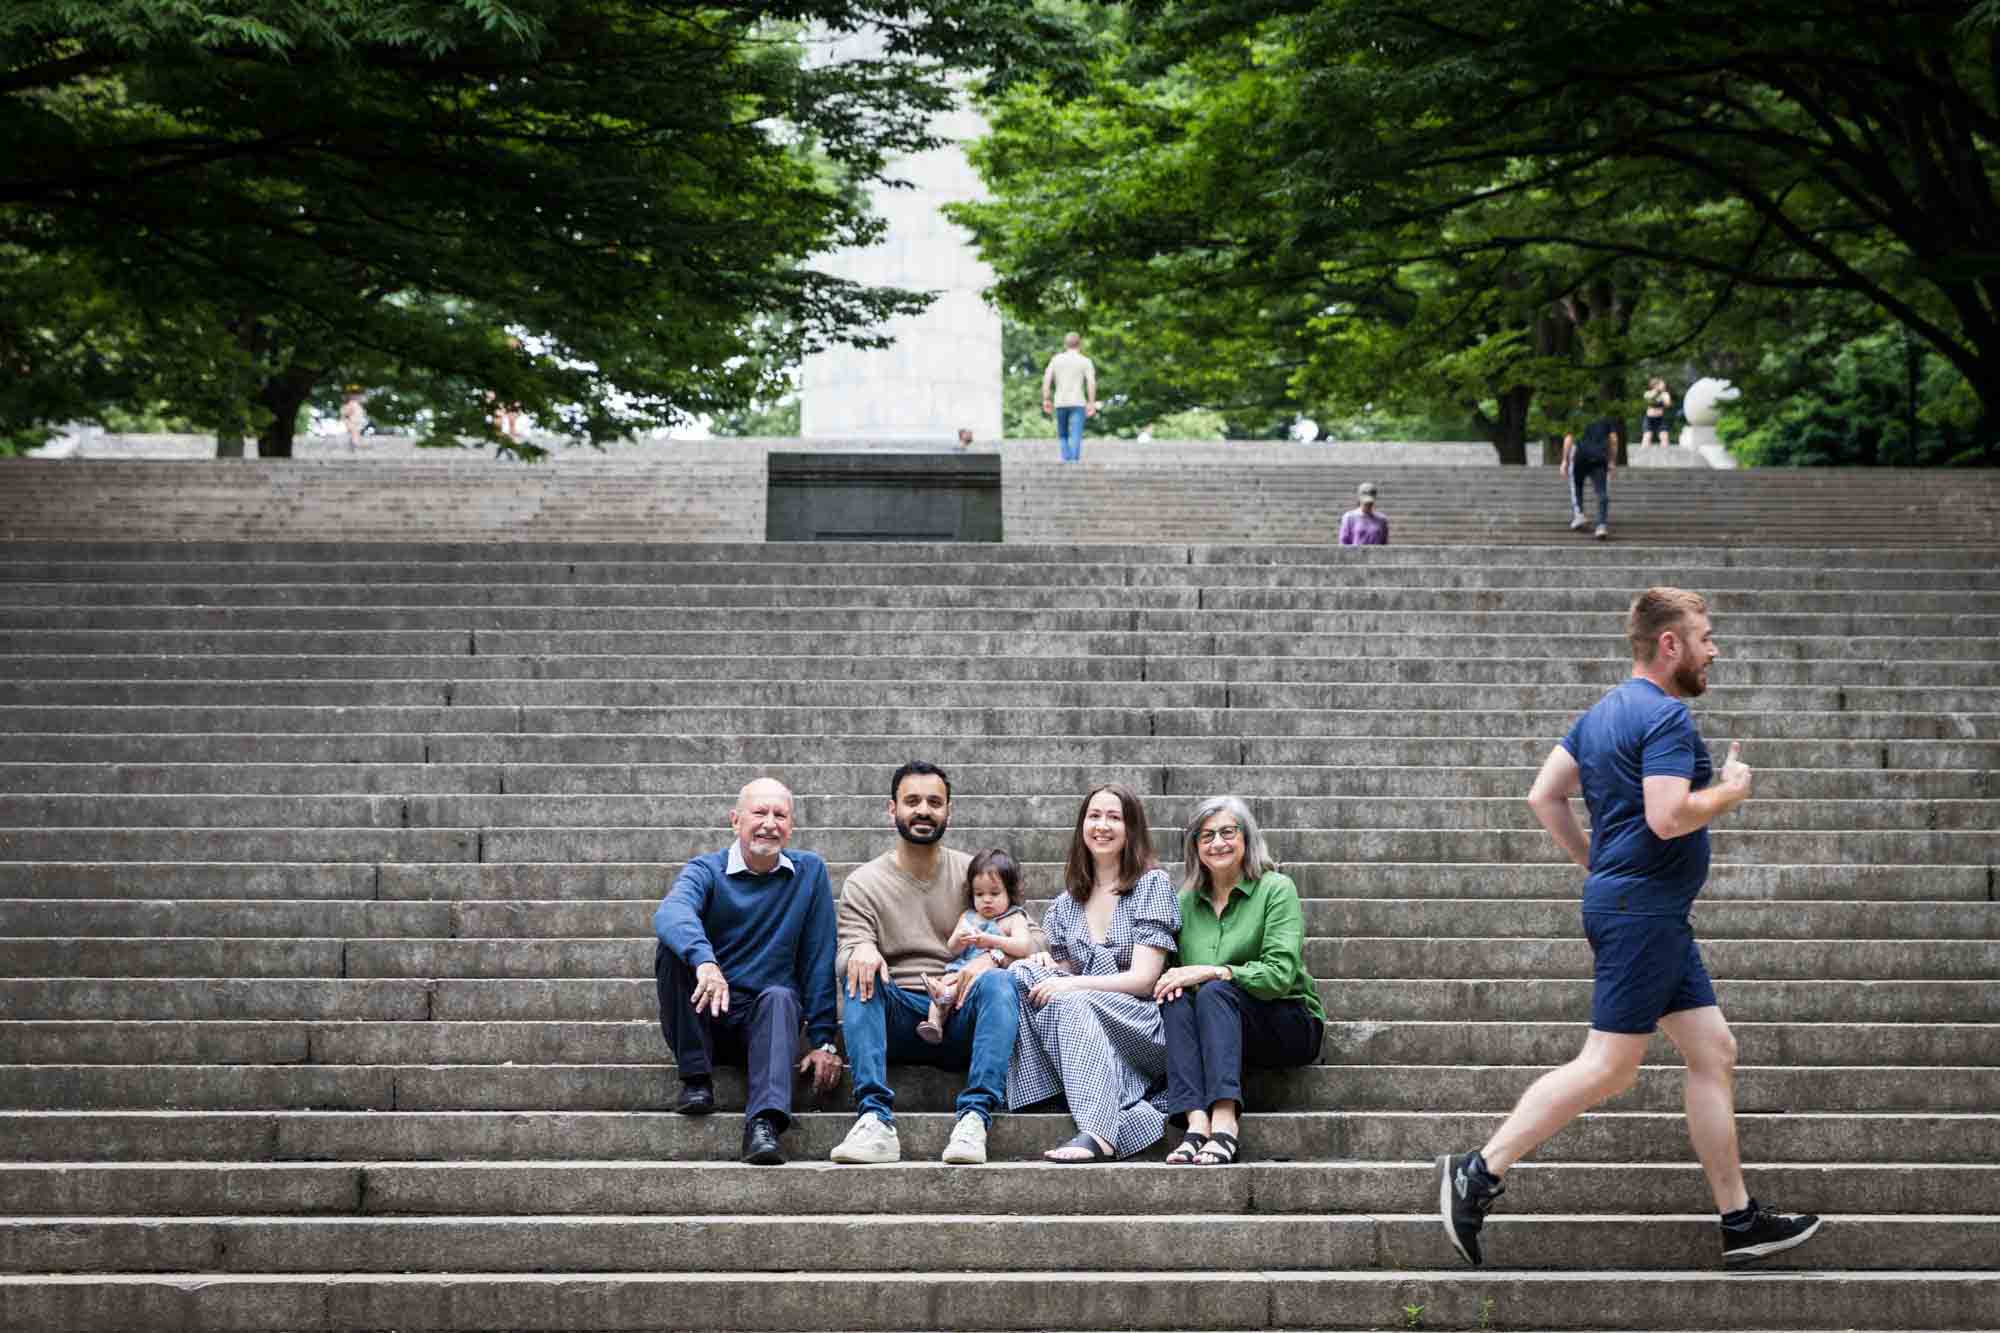 Family sitting on stone steps as jogger runs past